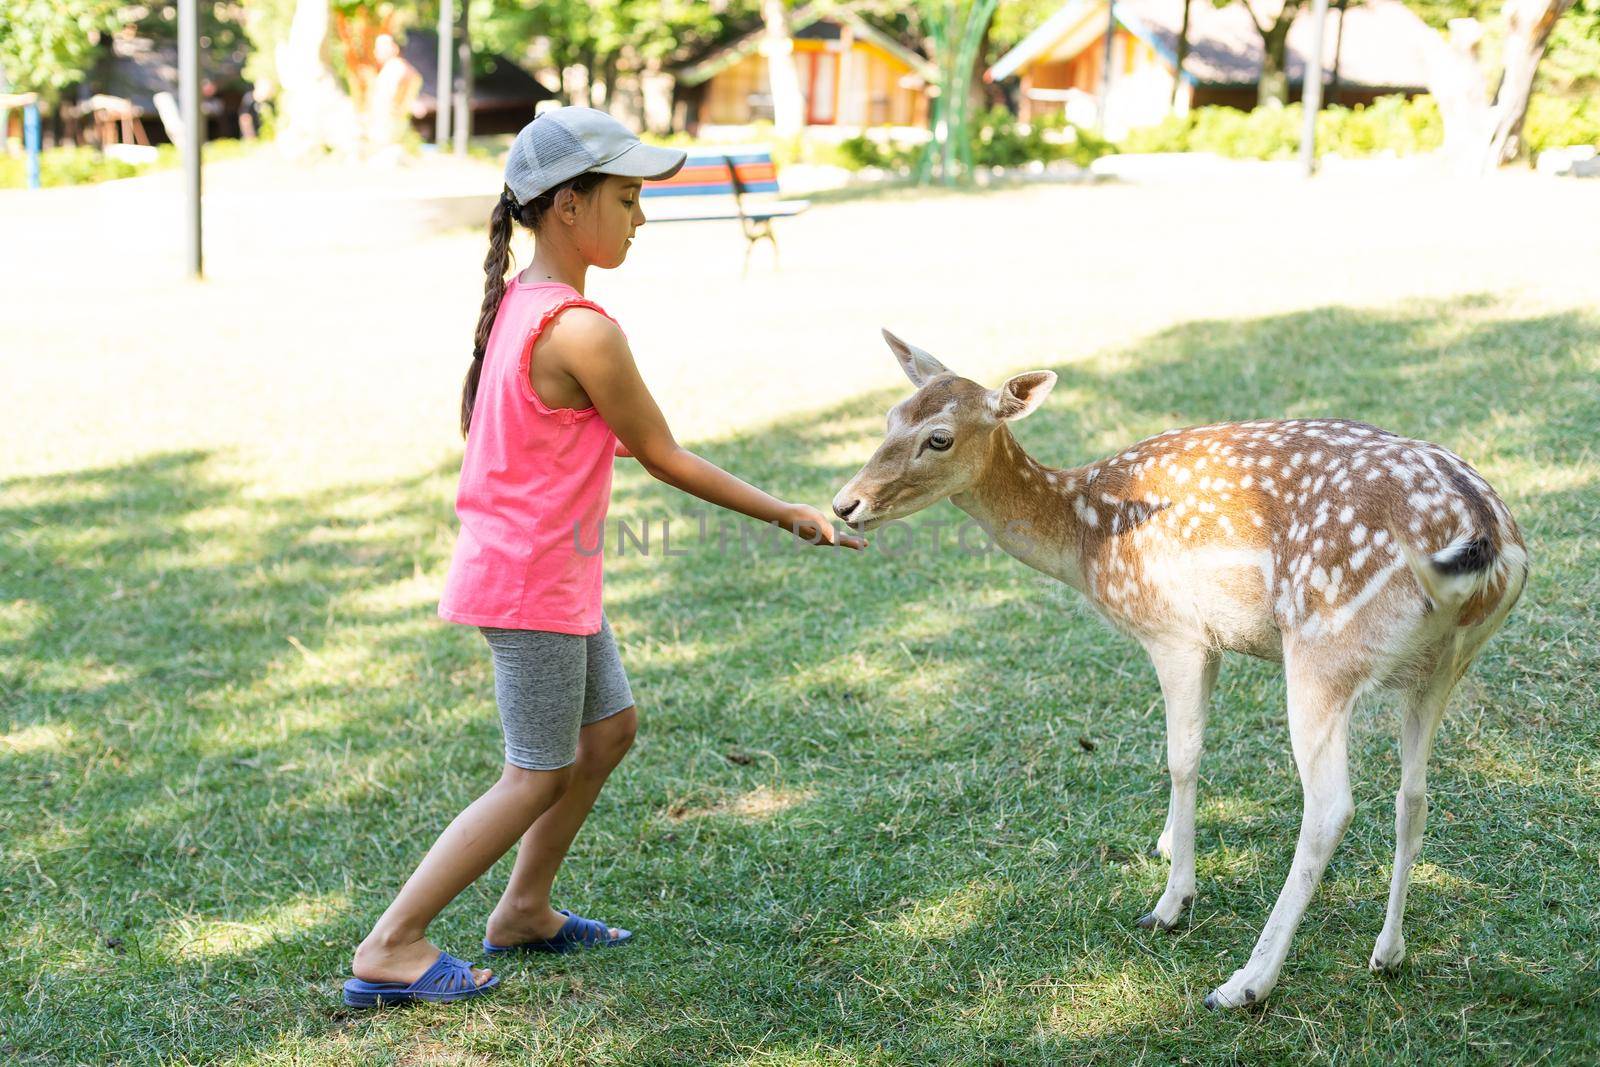 Photo of a young girl feeding deer and hugs him by Andelov13